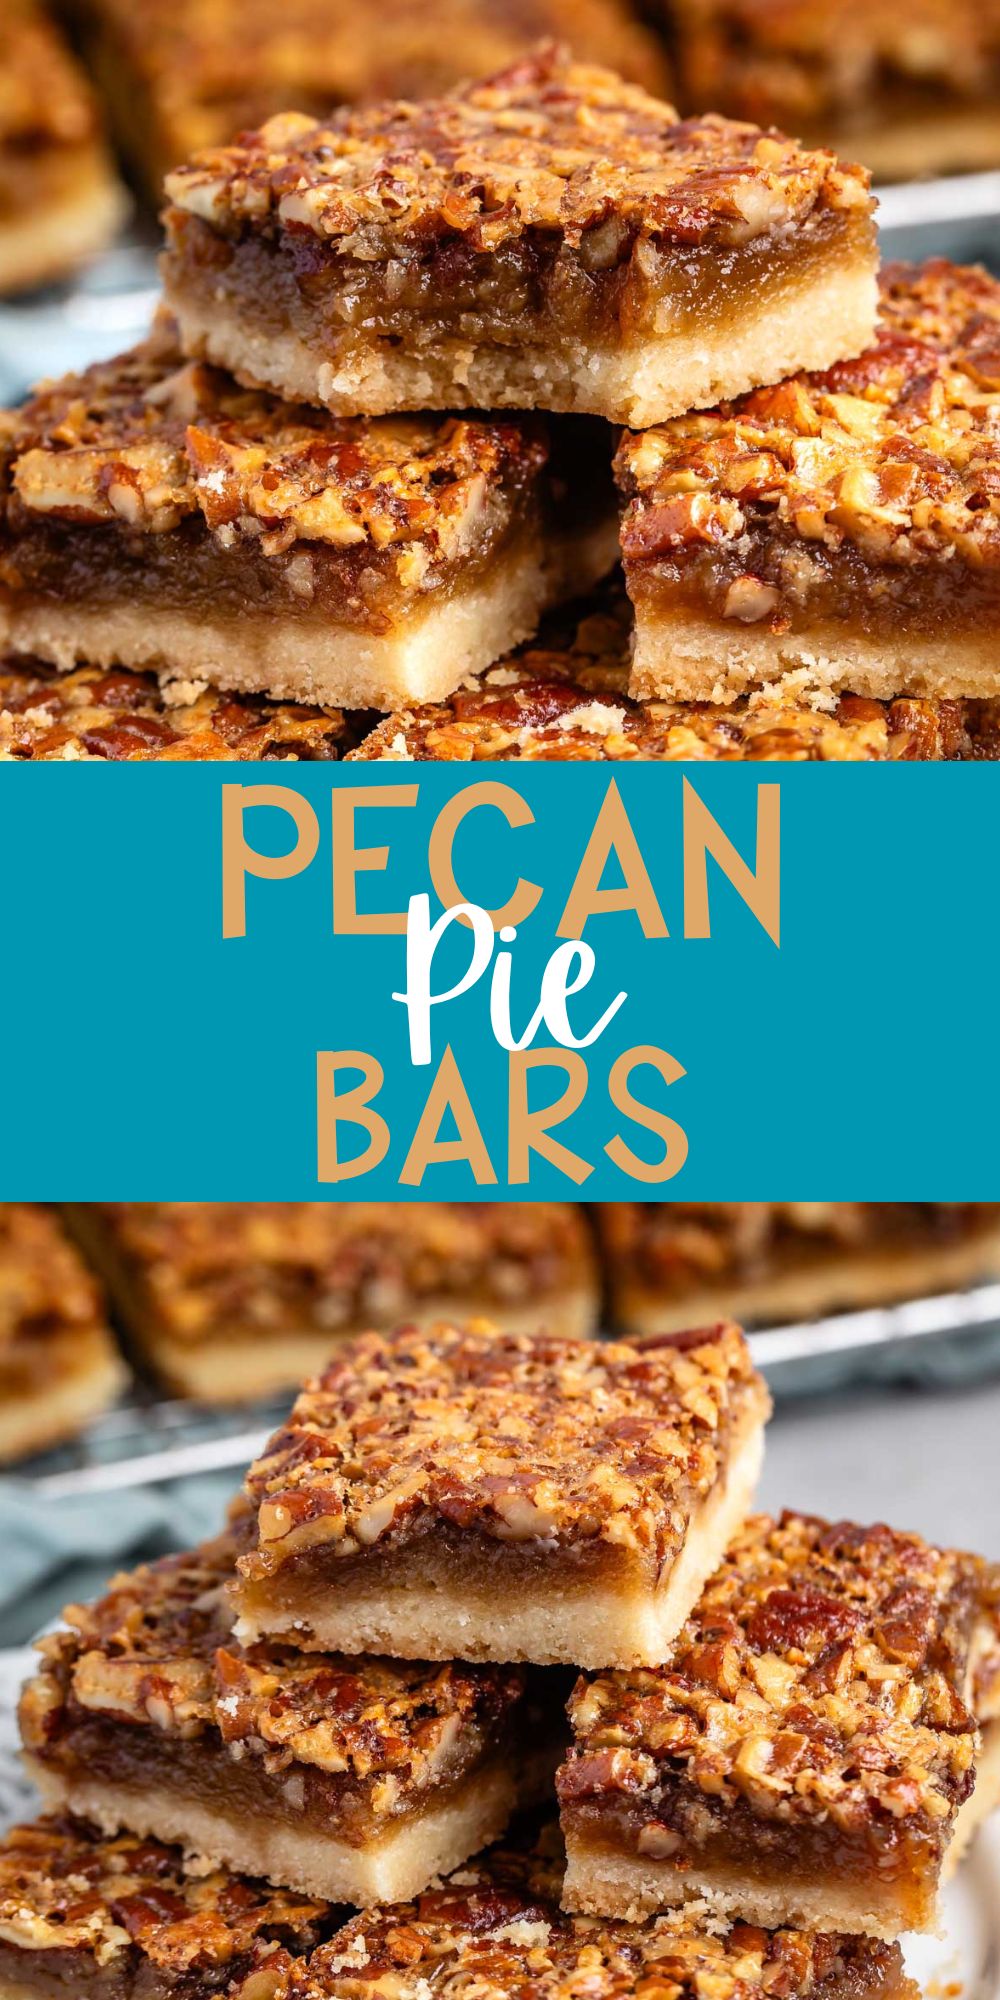 two photos of stacked pecan bars on a white plate with words on the image.